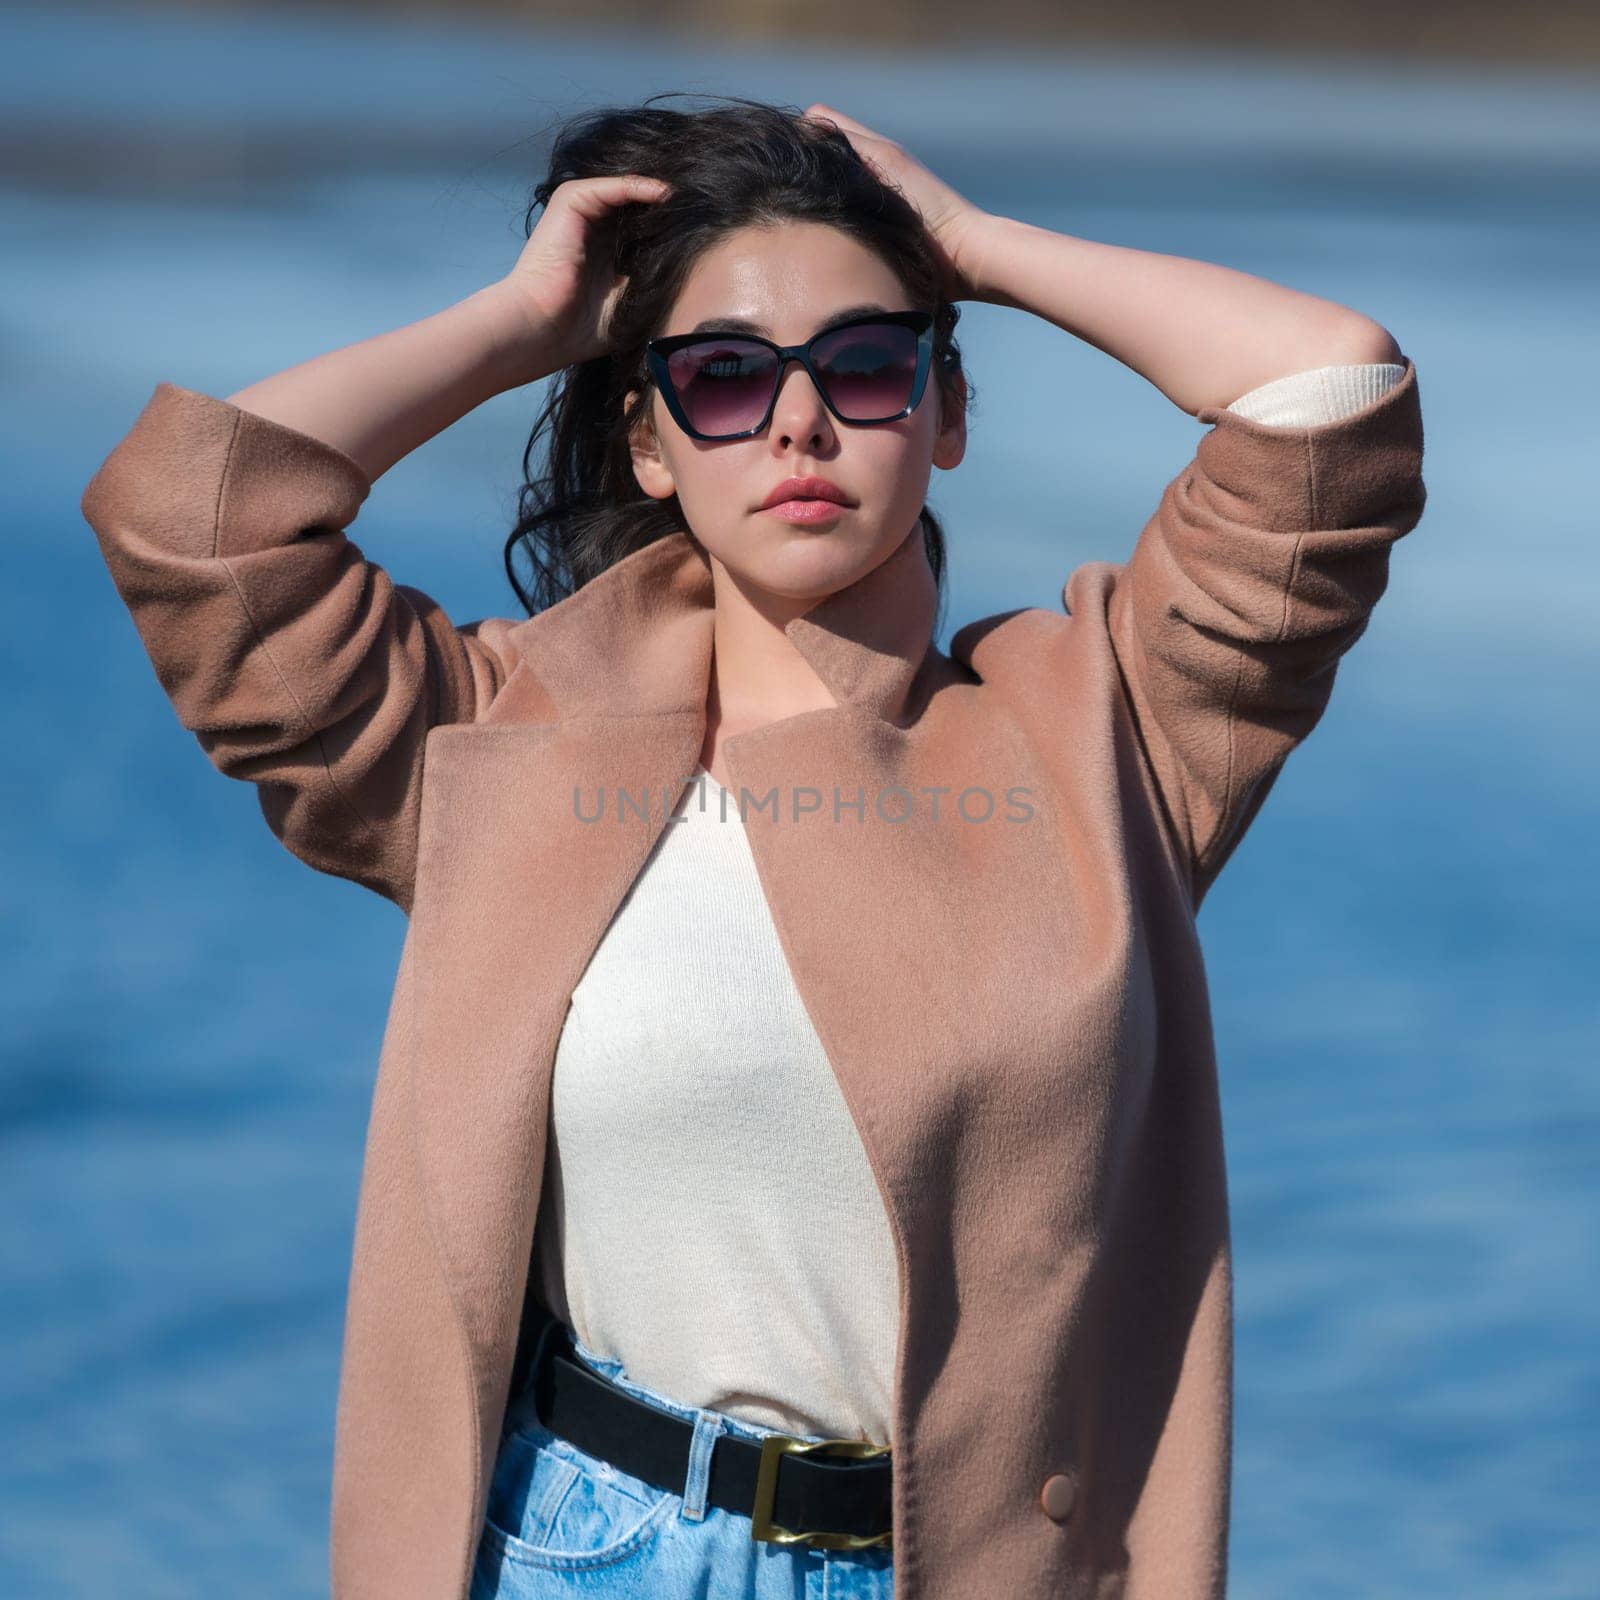 Fashionable young female with big breasts, long hair, plump lips and sunglasses, dressed in beige coat, white sweater and blue jeans posing outdoors against background of blue lake in sunny weather